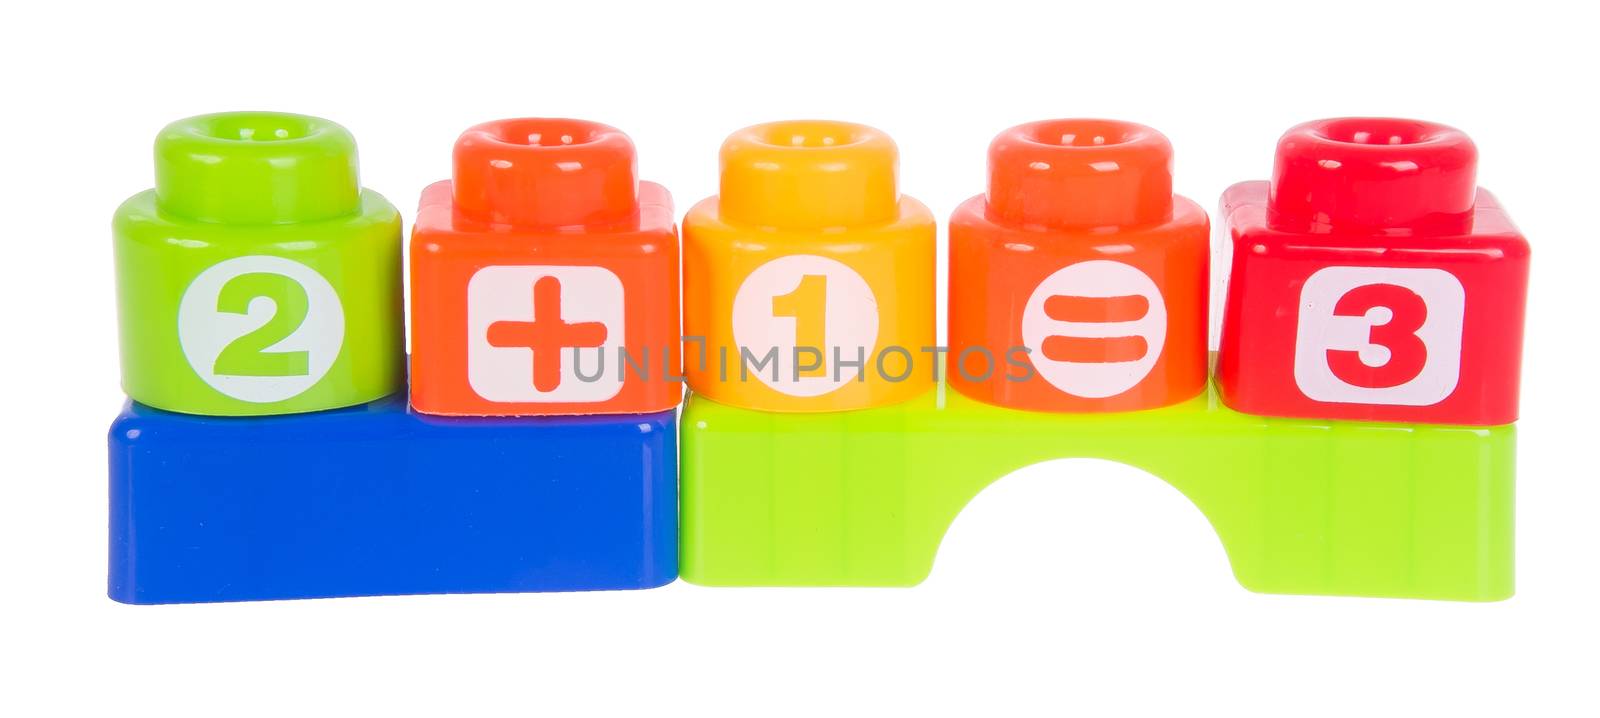 toy. Plastic toy blocks on the background by heinteh